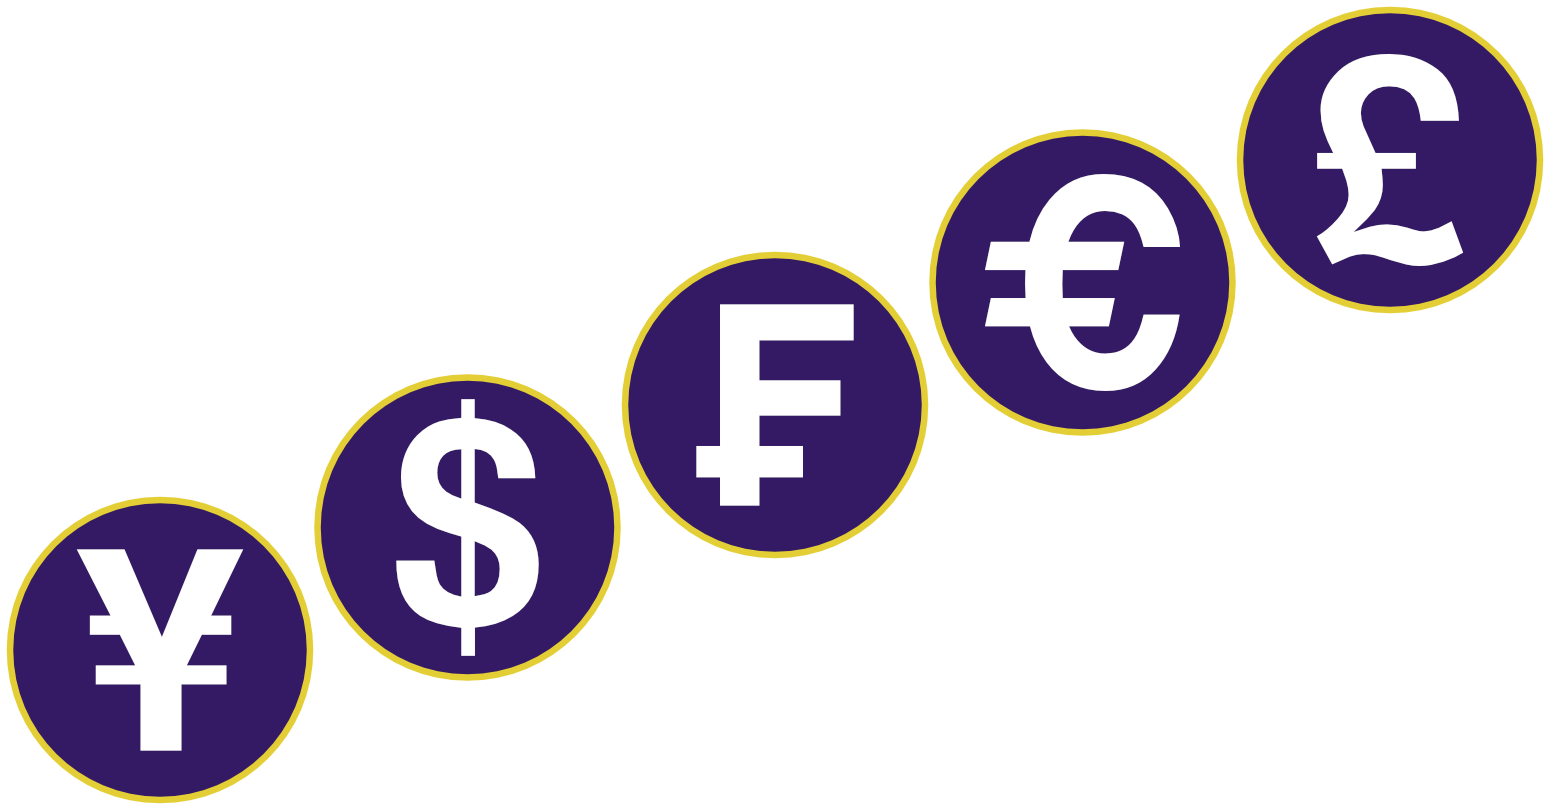 Five different currency symbols